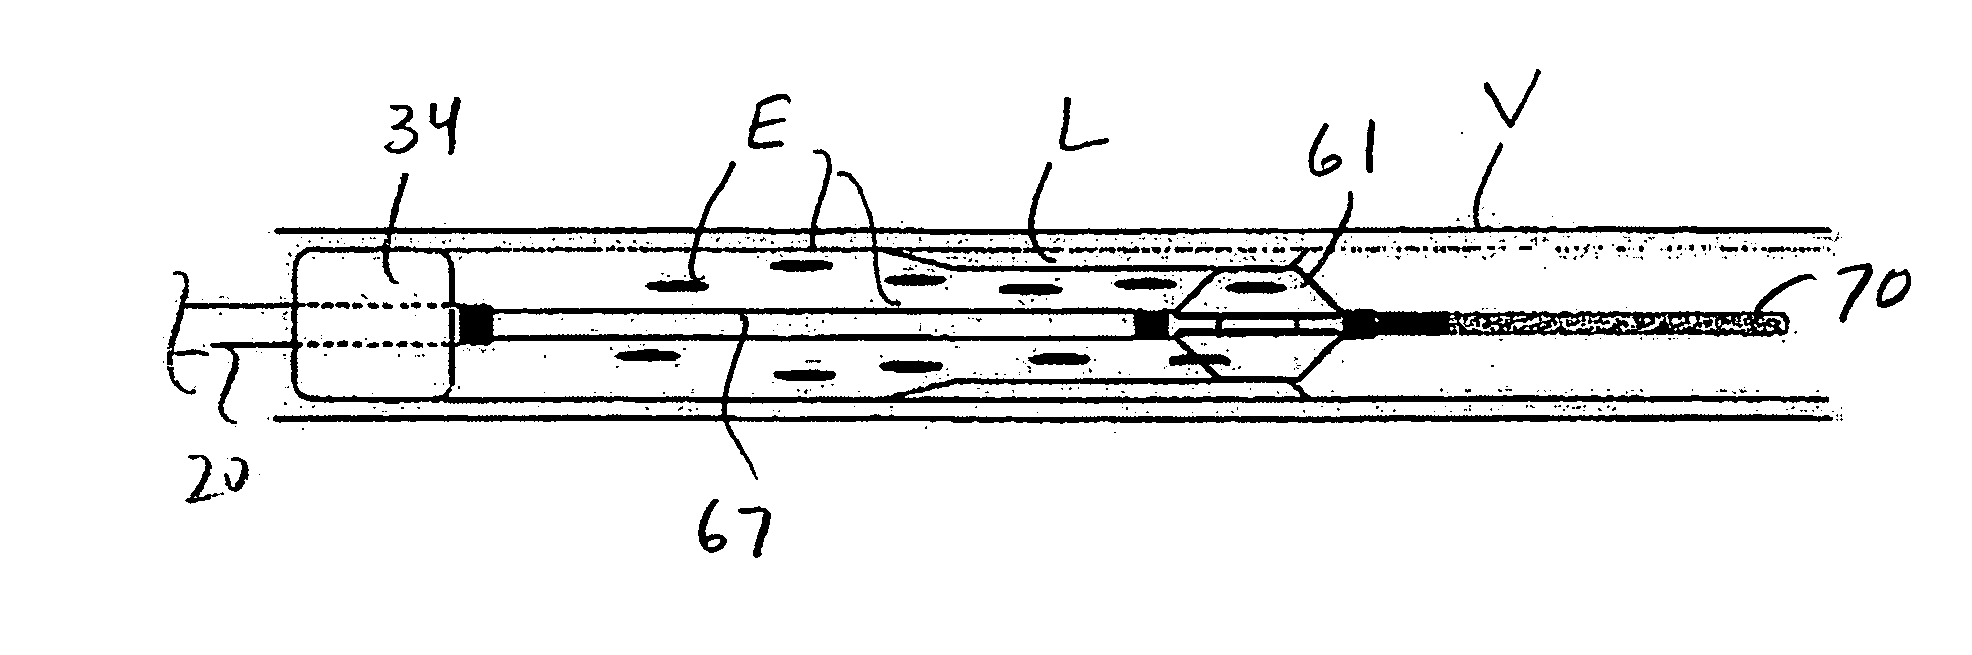 Embolic protection and plaque removal system with closed circuit aspiration and filtering